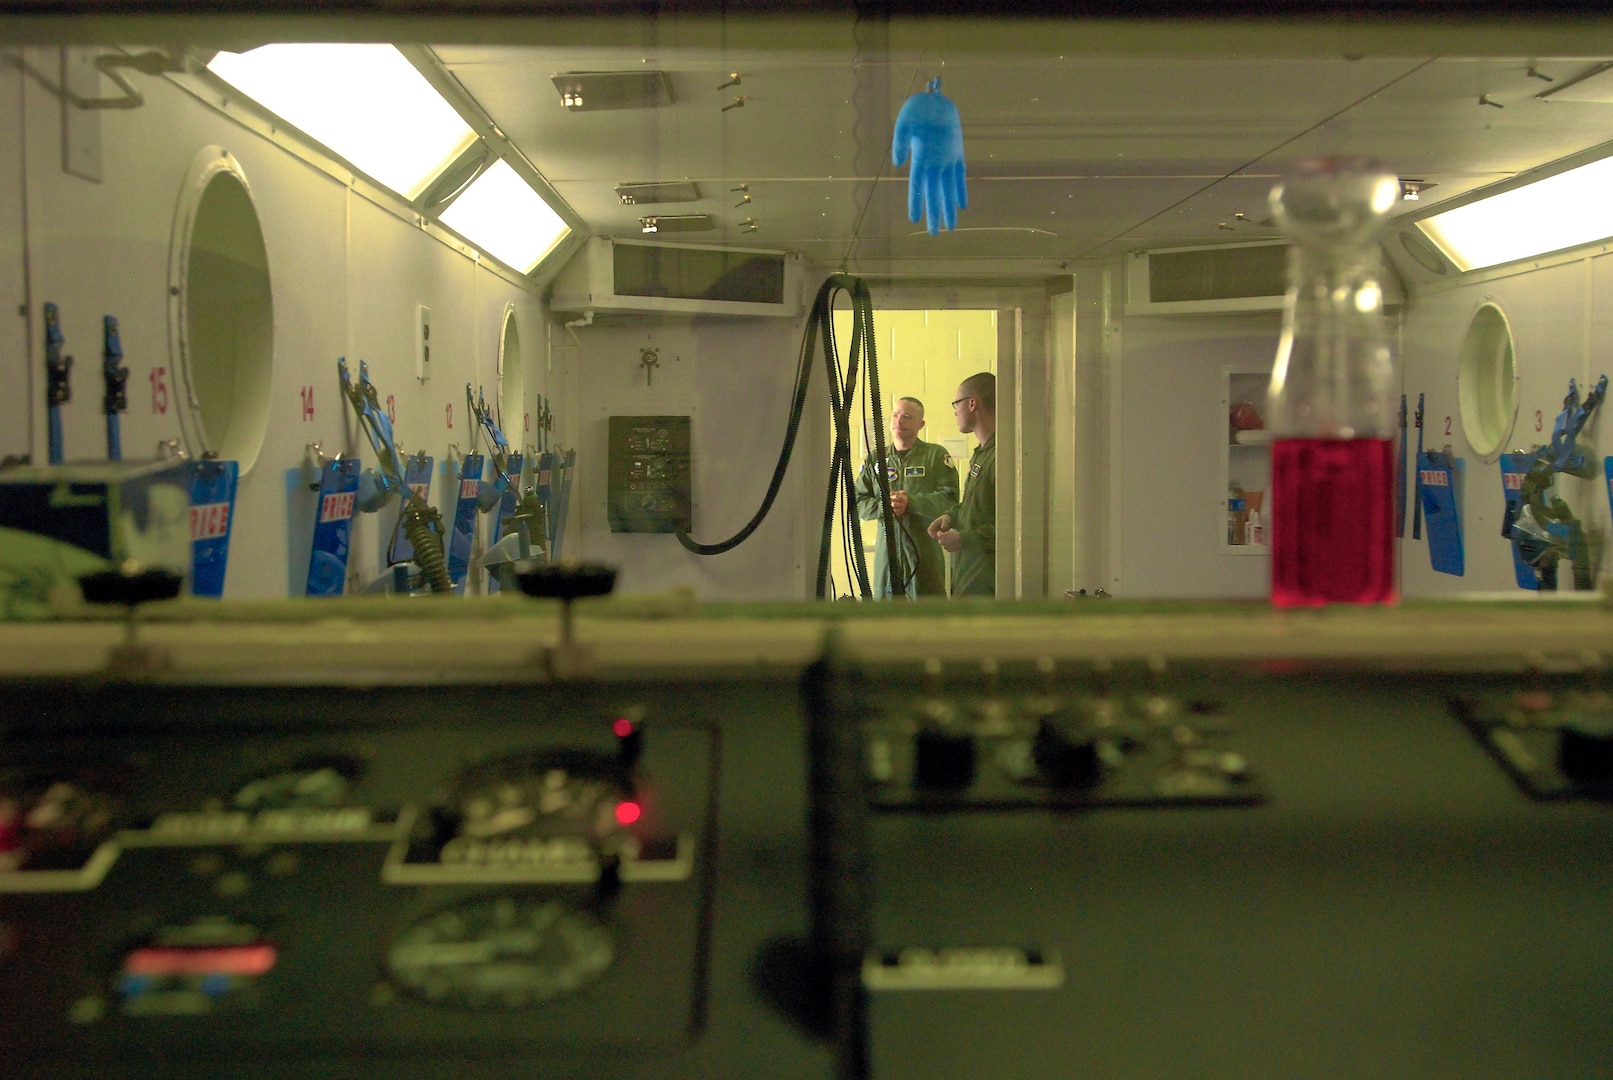 Part of the control panel and interior of the hypobaric chamber the 359th Aeromedical Squadron uses on Randolph Air Force Base, Texas, to test and train aircrew for hypoxia, or altitude sickness. The latex glove hanging from the ceiling expands and contracts with the changes in barometric pressure in the chamber, it?s used to show how gases in the human body also expand and contract with pressure changes. The bottle of red liquid has an inverted beaker in it and is used to show how pressure affects air and liquid in the inner ear. (U. S. Air Force photo/Brian McGloin)